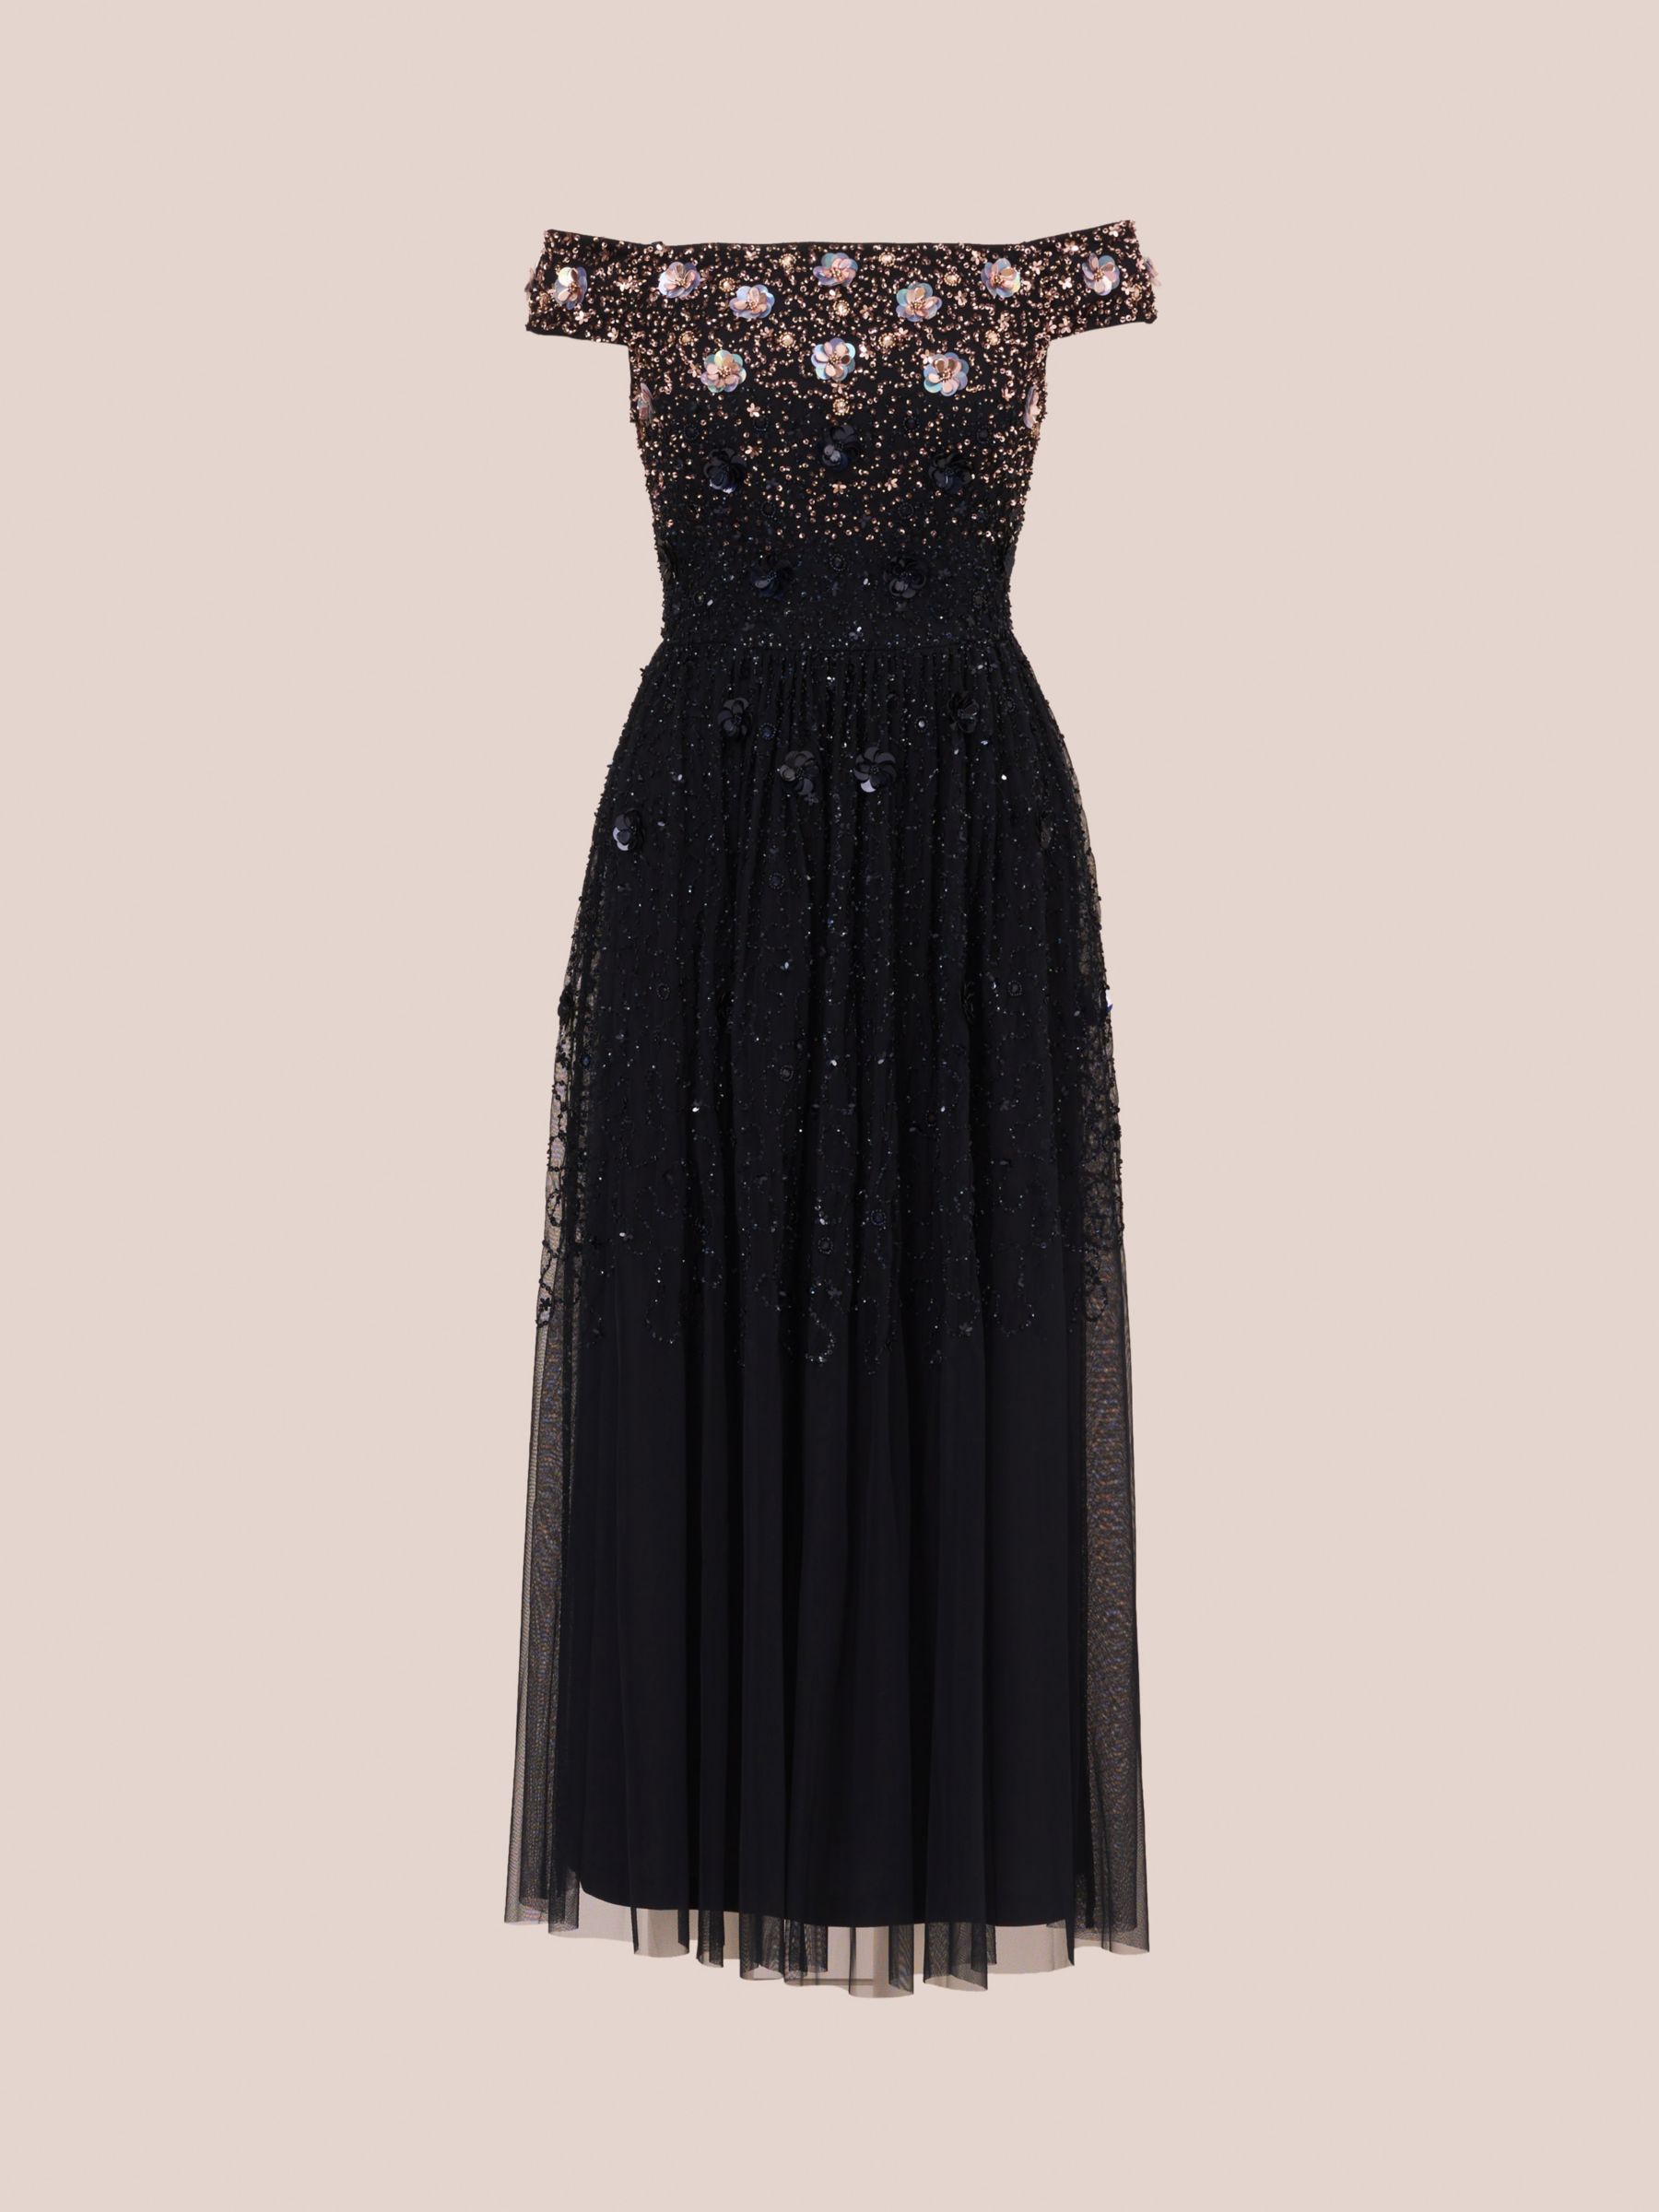 Adrianna Papell Sequin Rosettes Dress, Navy/Rose Gold at John Lewis ...